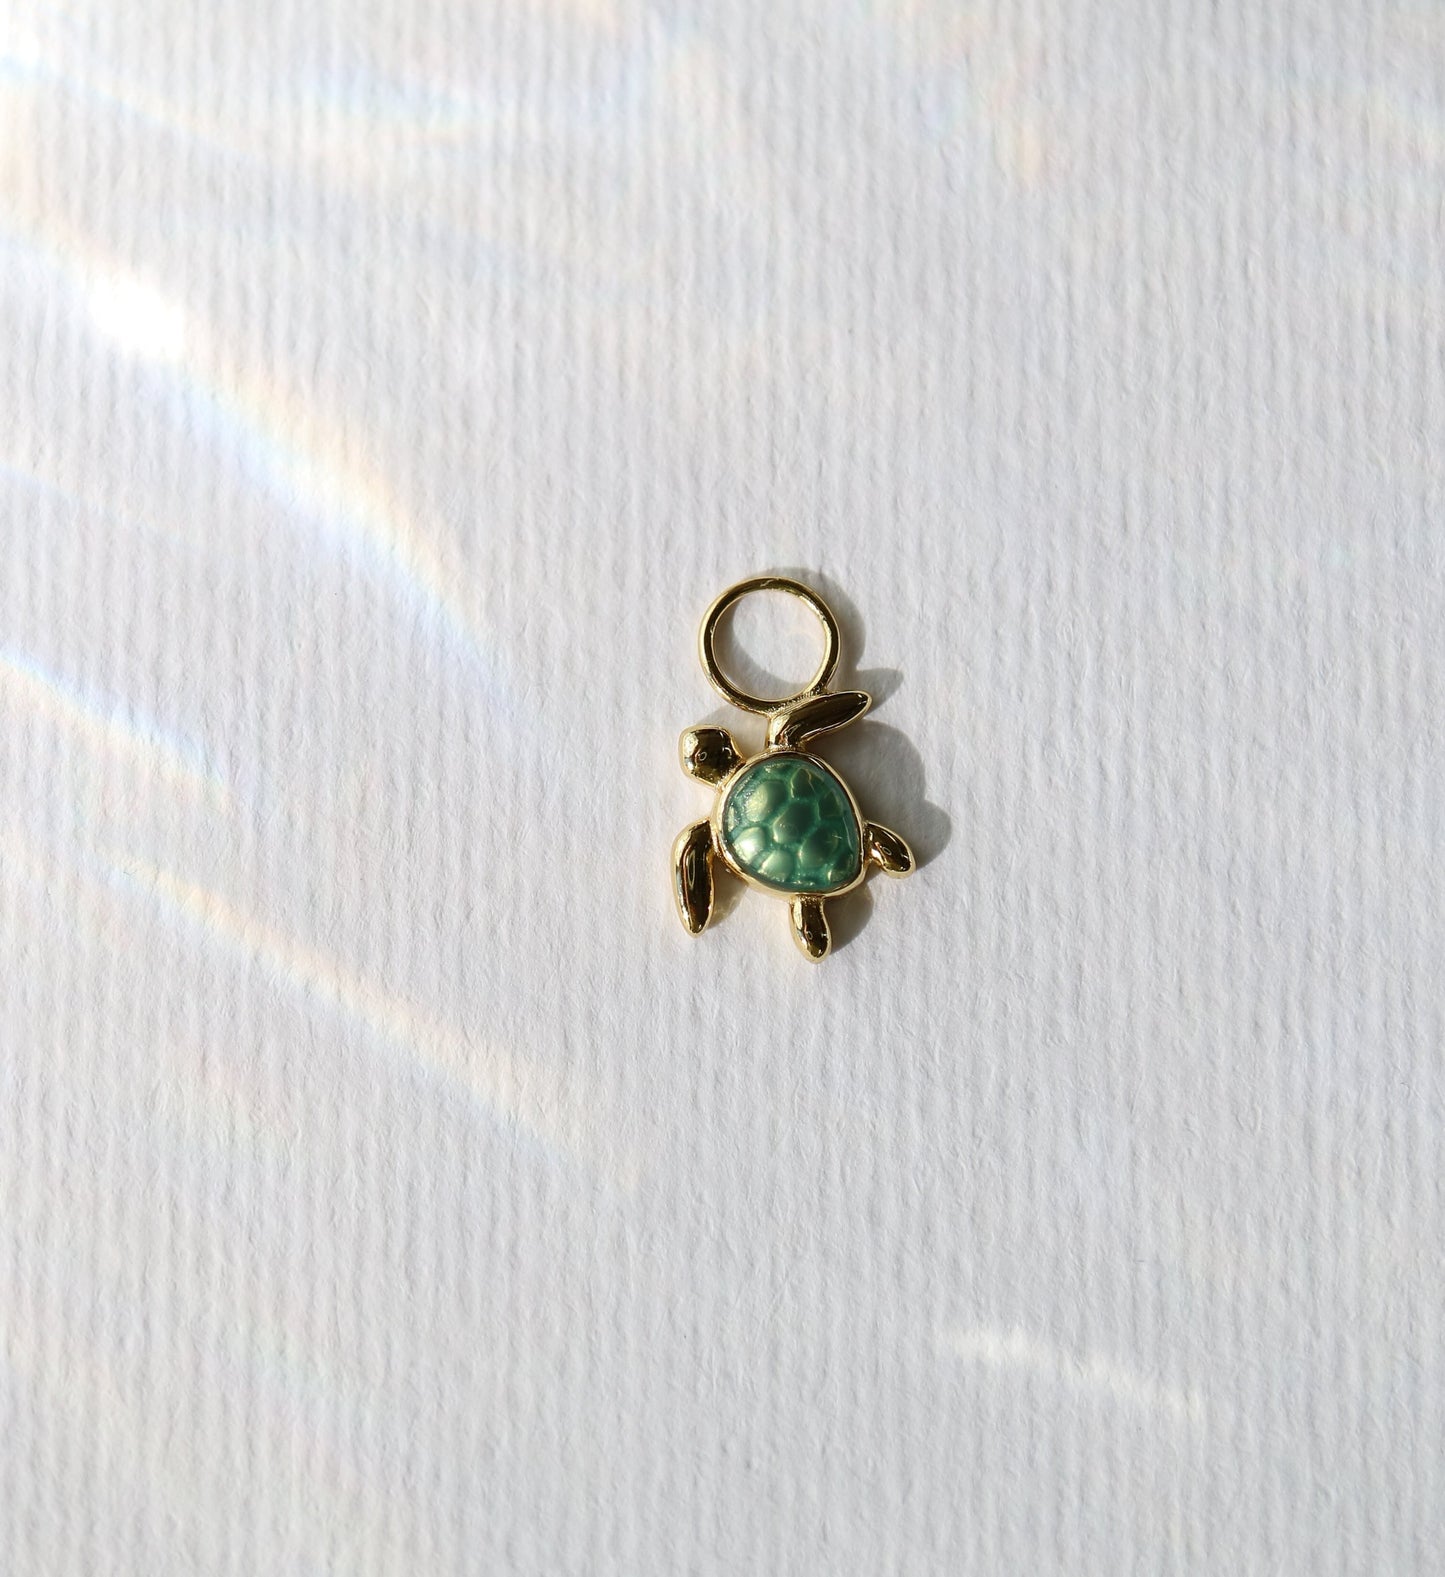 Turtle charm for jewelry